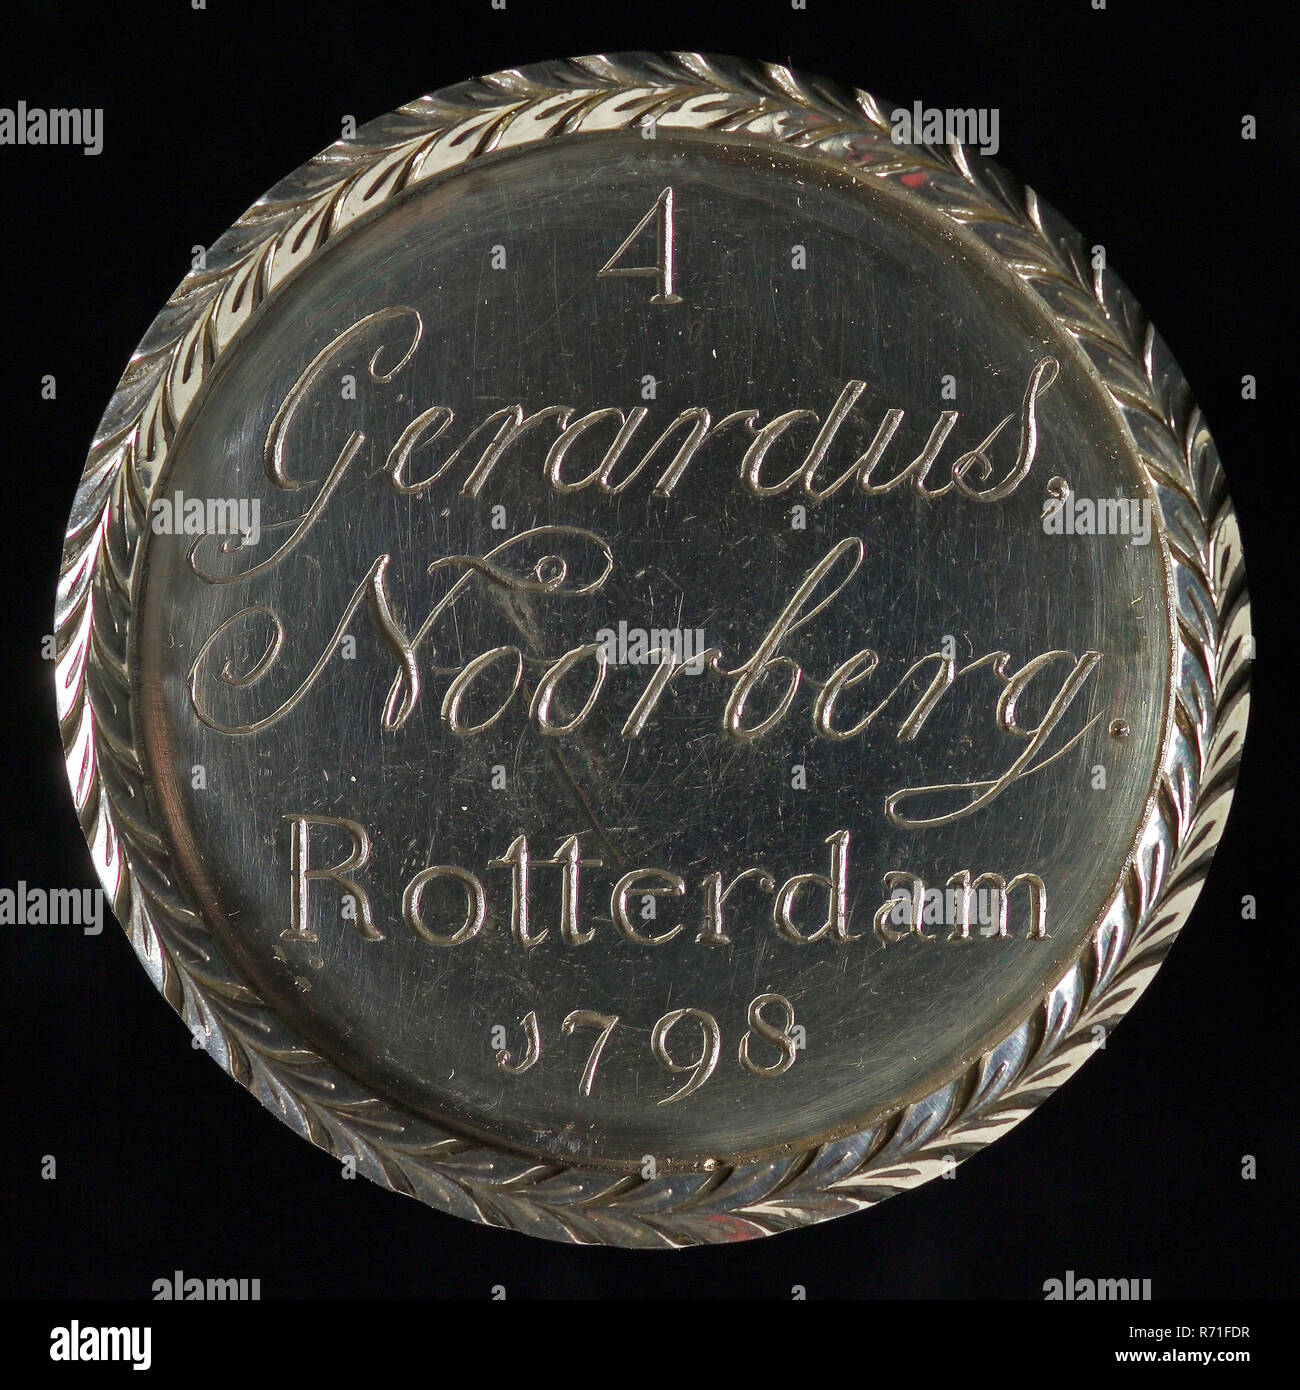 Price medal of the Teekengenootschap This to Hooger, awarded to Gerardus Noorberg, price medal penning footage silver, engraved and text, HEREBY TO HOOGER drawing society This up to Hooger Rotterdam Stock Photo